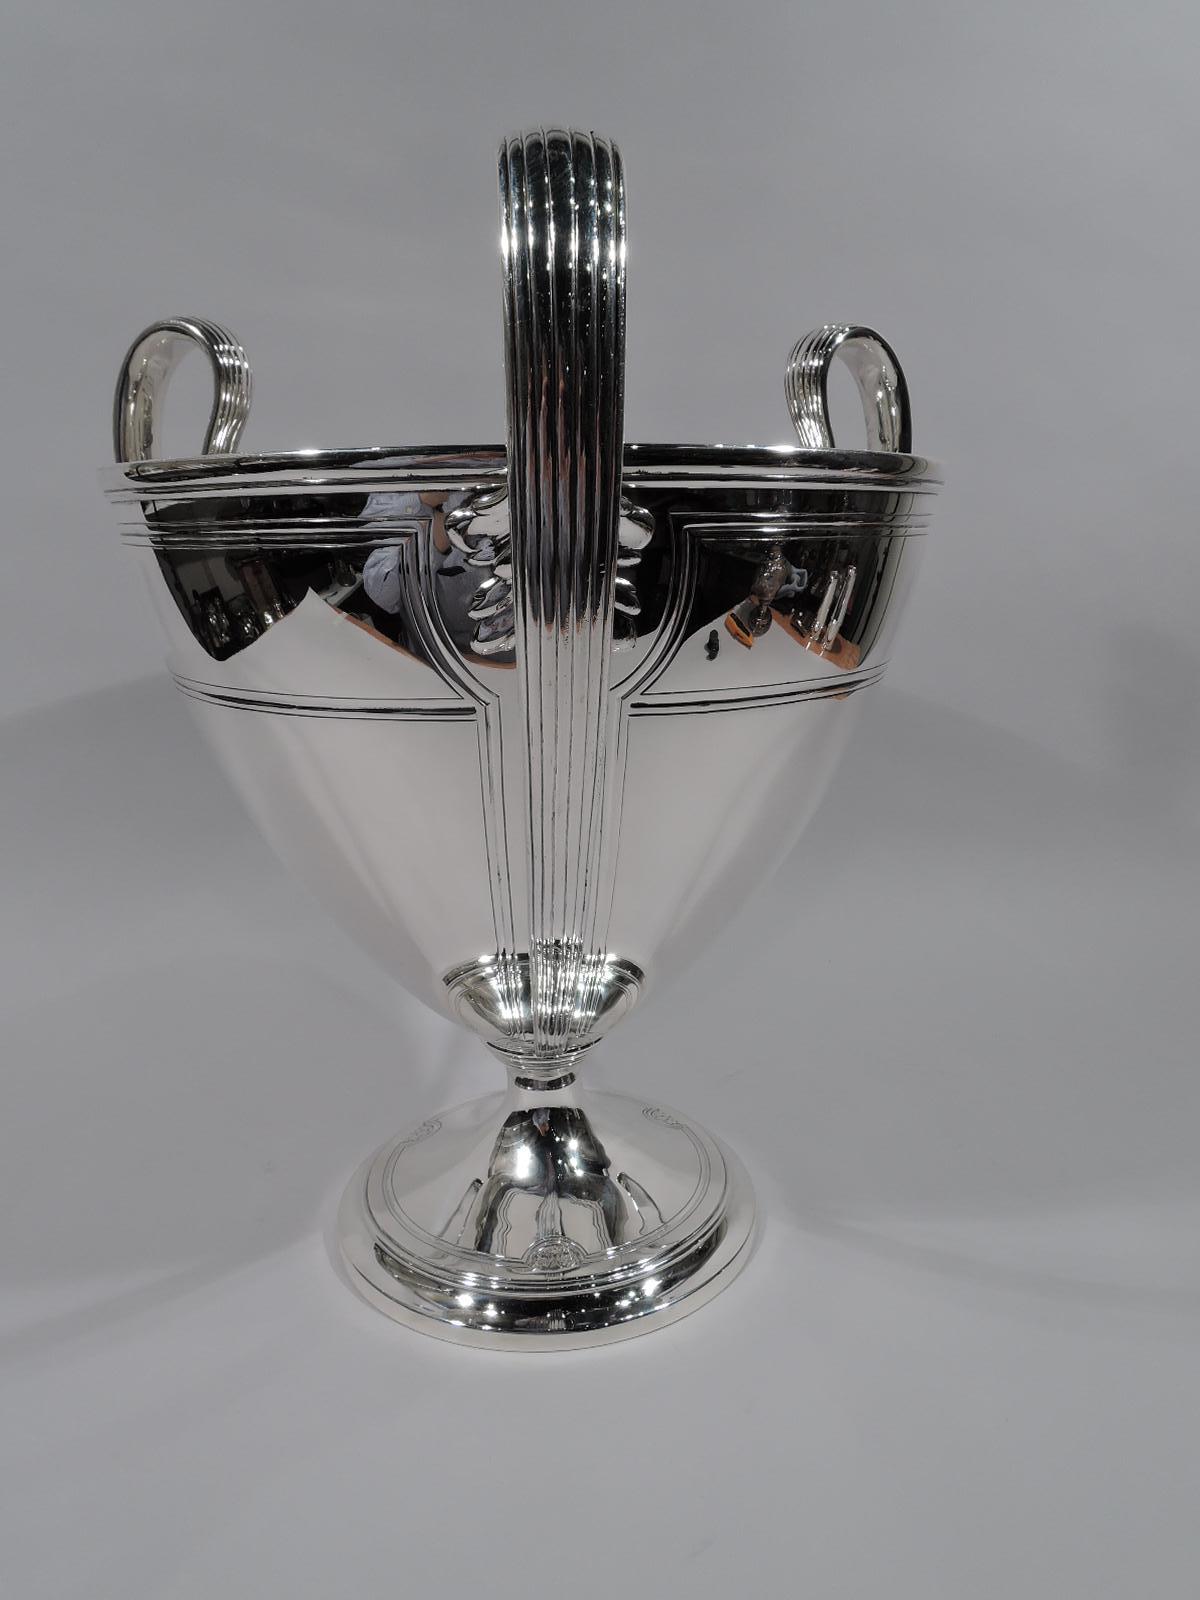 Large and heavy Art Deco Classical sterling silver trophy cup. Made by Tiffany & Co. in New York, circa 1912. Ovoid bowl on stepped foot. Three high-looping and reeded tapering leaf-mounted handles. On exterior are 3 chased paneled curvilinear